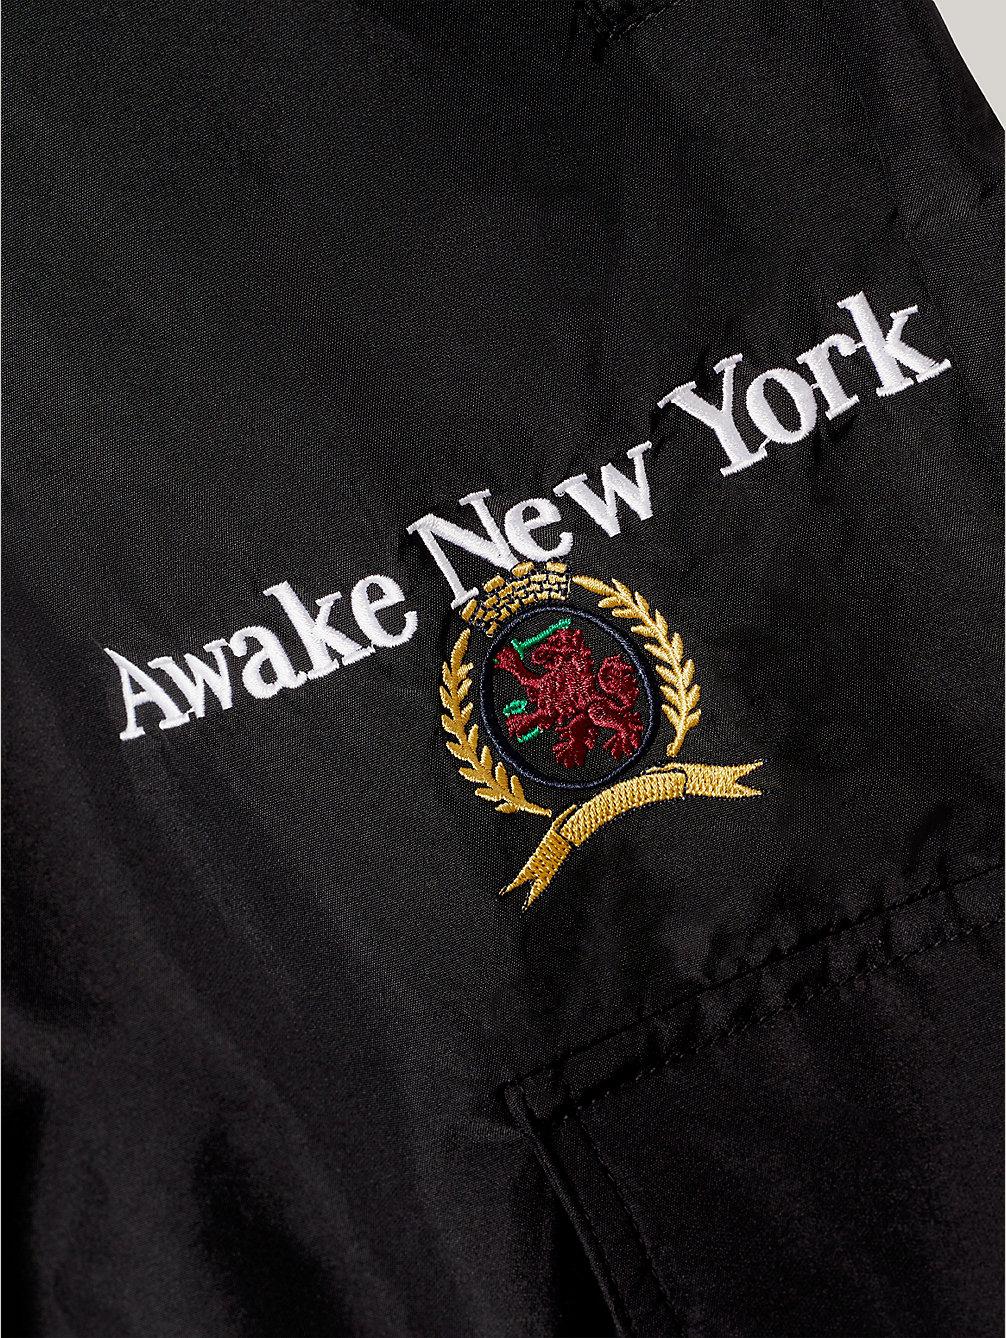 black tommy x awake ny drawstring cargo trousers for men tommy jeans